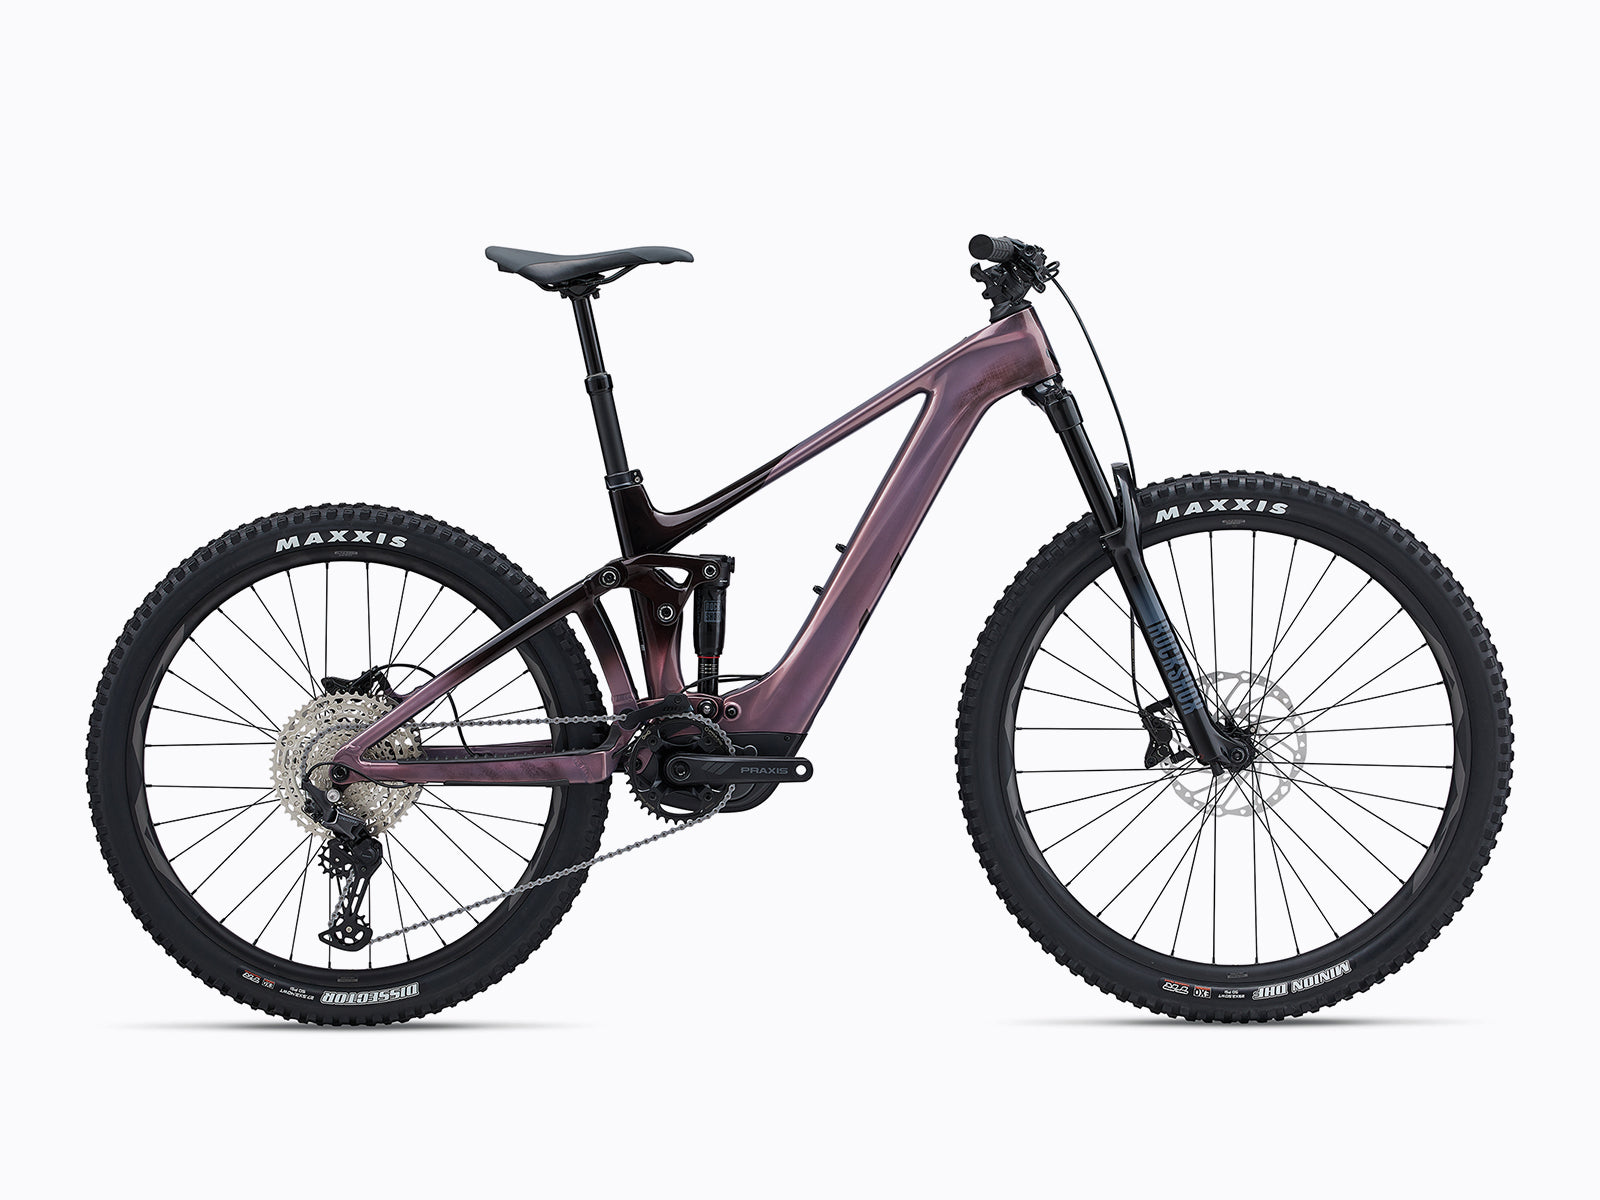 image includes product image for intrigue x advanced e+ elite 3, now available to order on giant bicycles australia